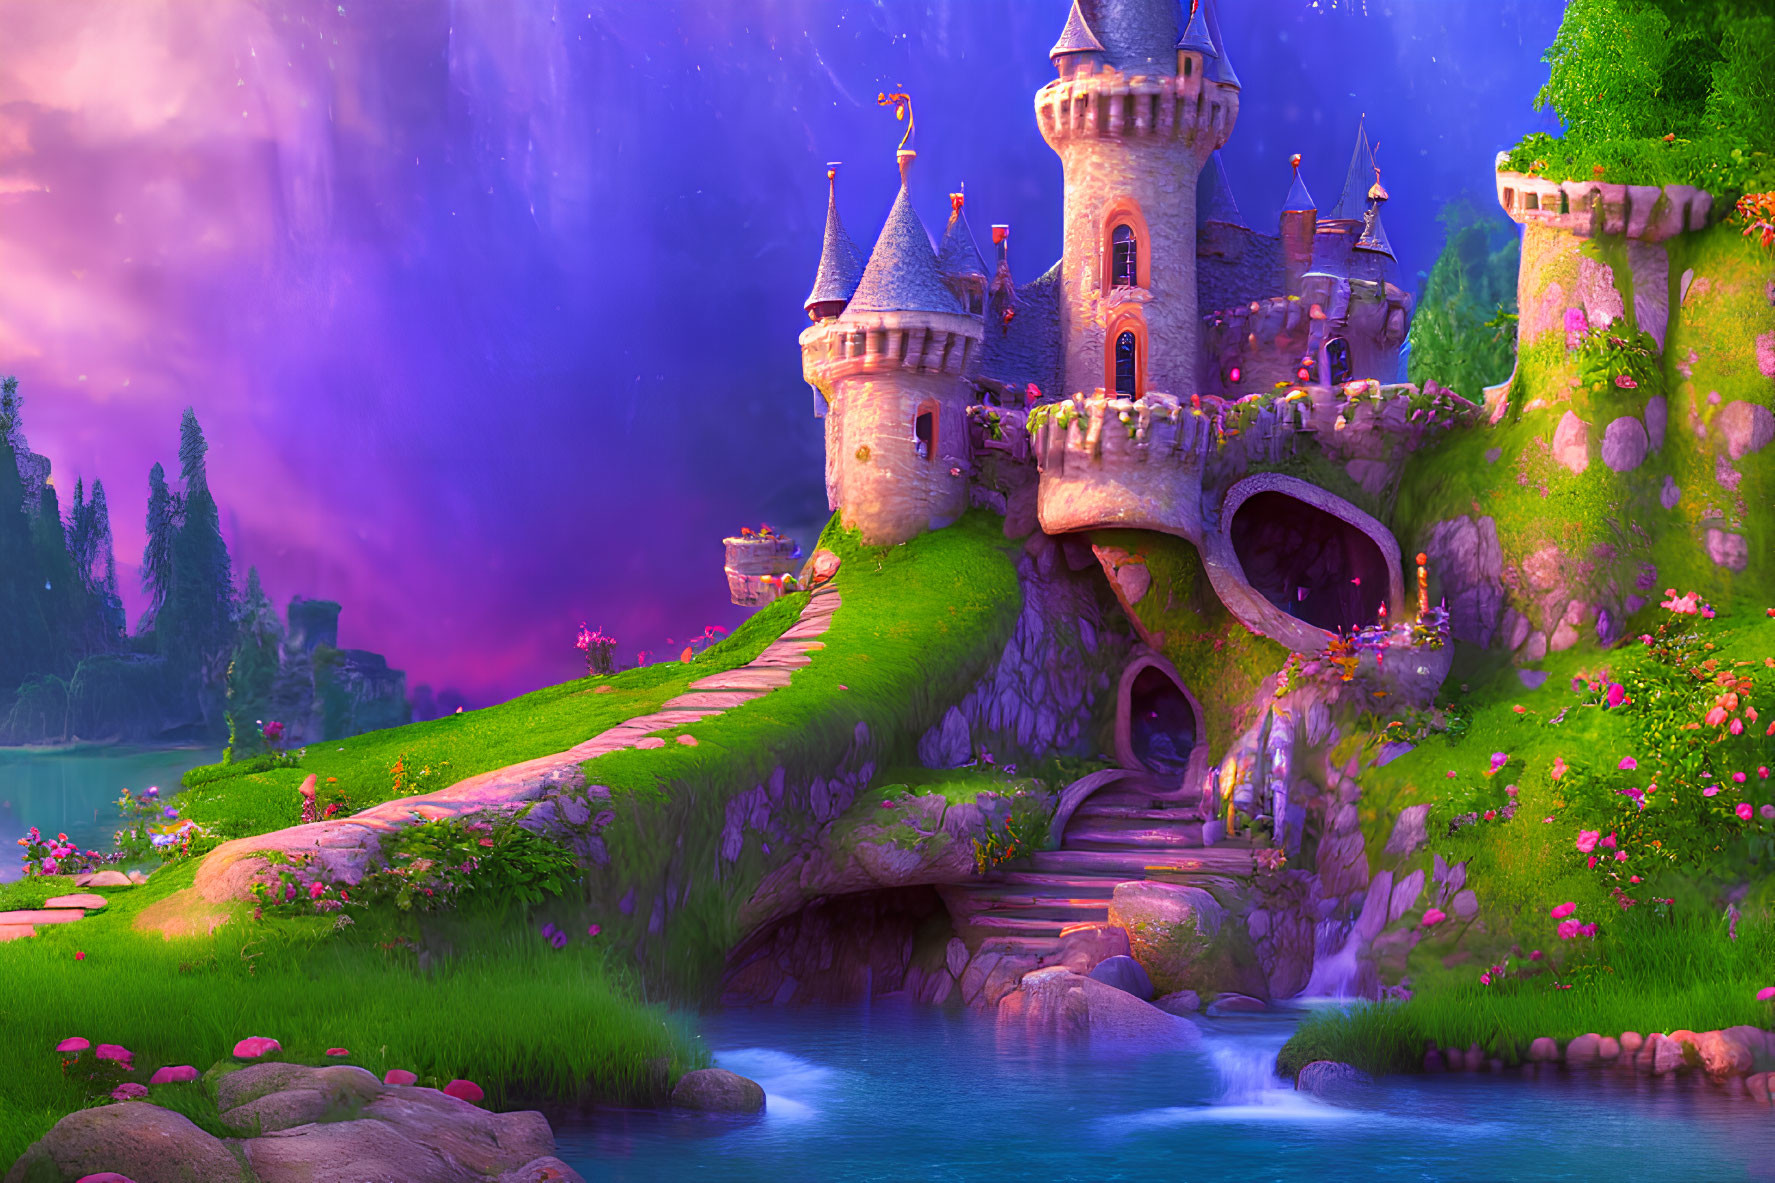 Colorful Fairytale Castle with Towers and Arches in Lush Landscape